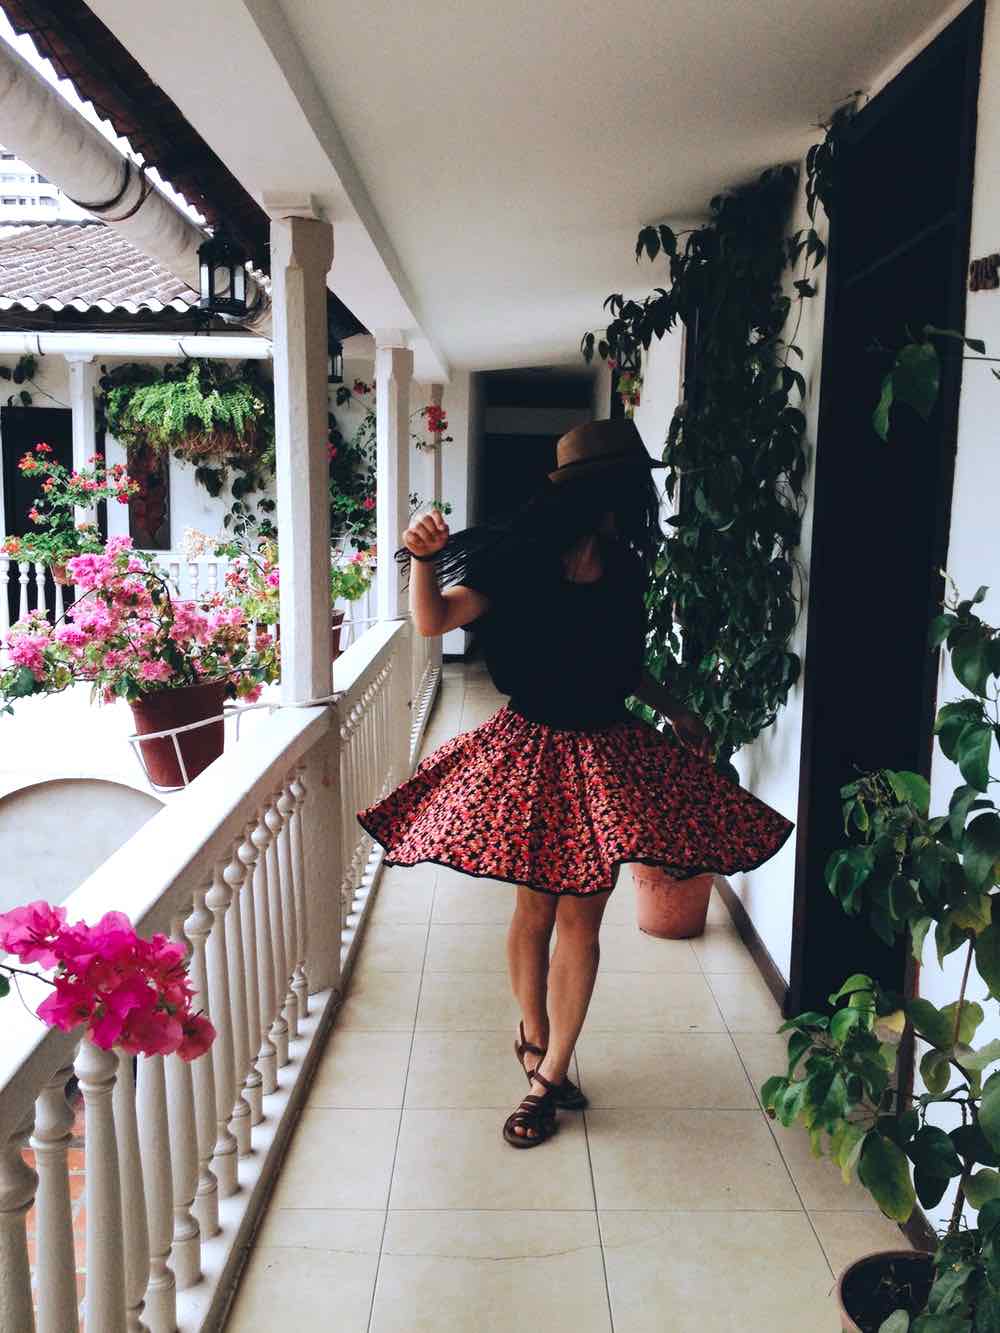 Woman Dancing In Hallway | 13 Cute College Outfit Ideas That'll Make You Look Trendy